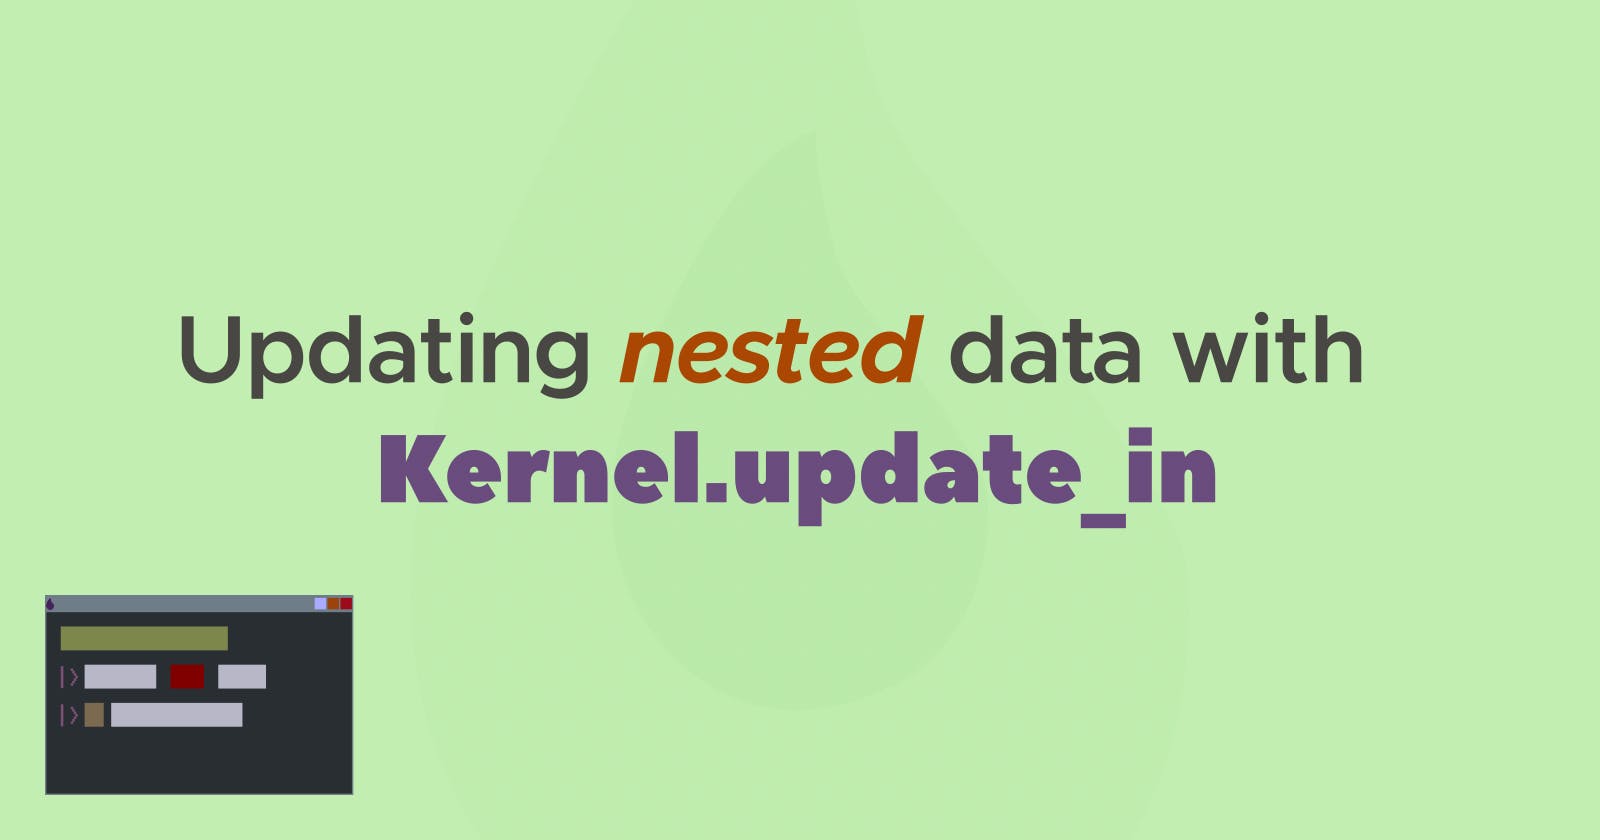 Updating nested data with Kernel.update_in